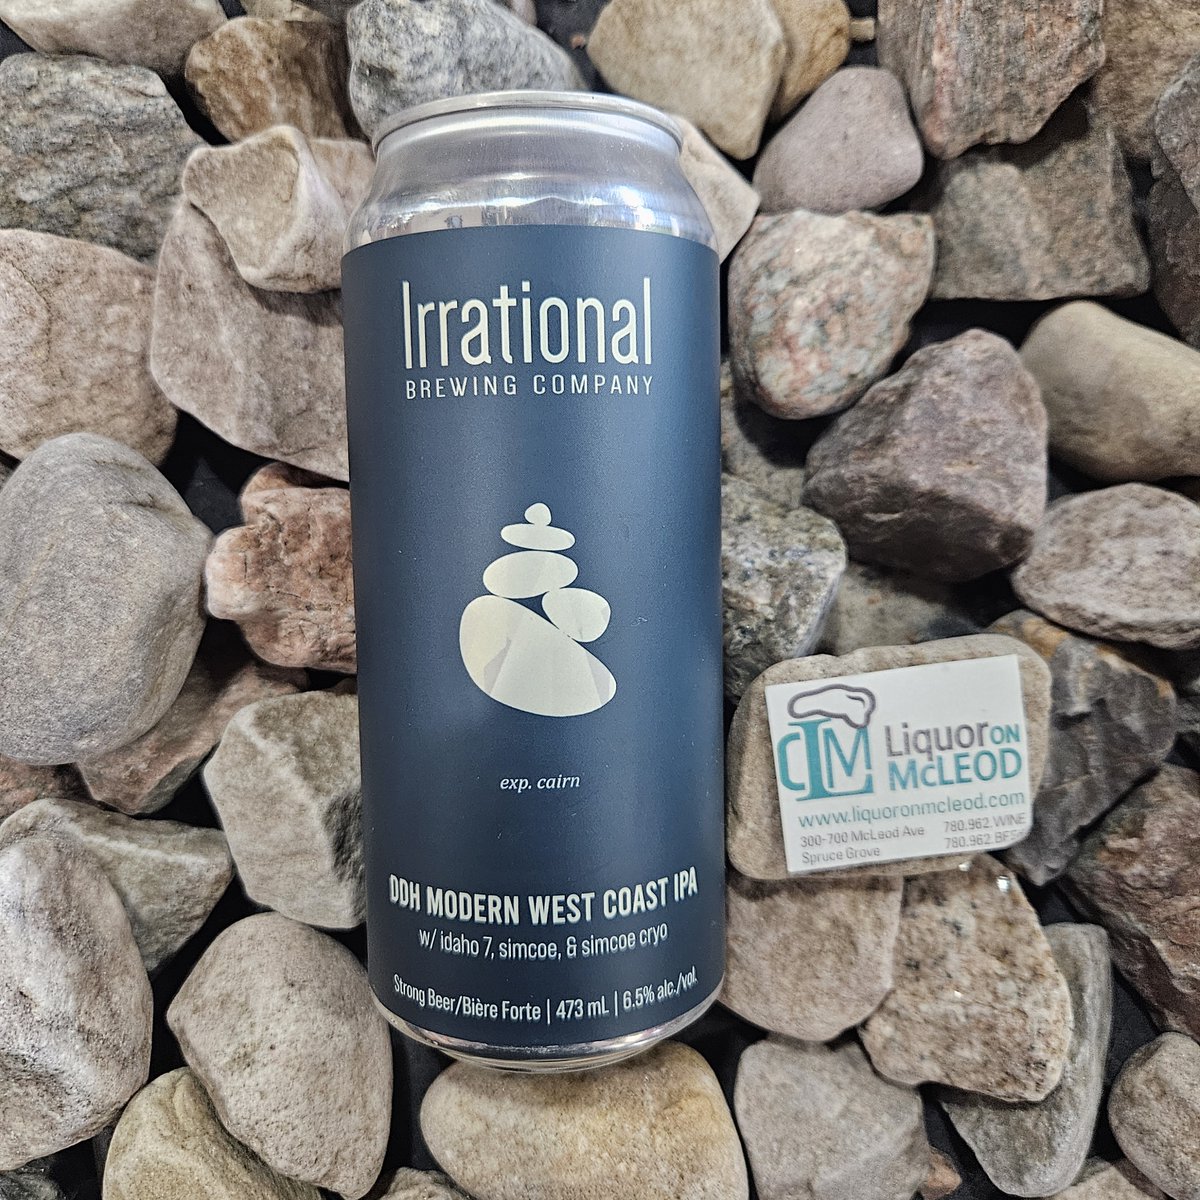 Cairn from Irrational Brewing is their latest experimental DDH Modern West Coast IPA. Get it before it is gone!

#irrationalbrewing #sprucegrove #stonyplain #liquoronmcleod